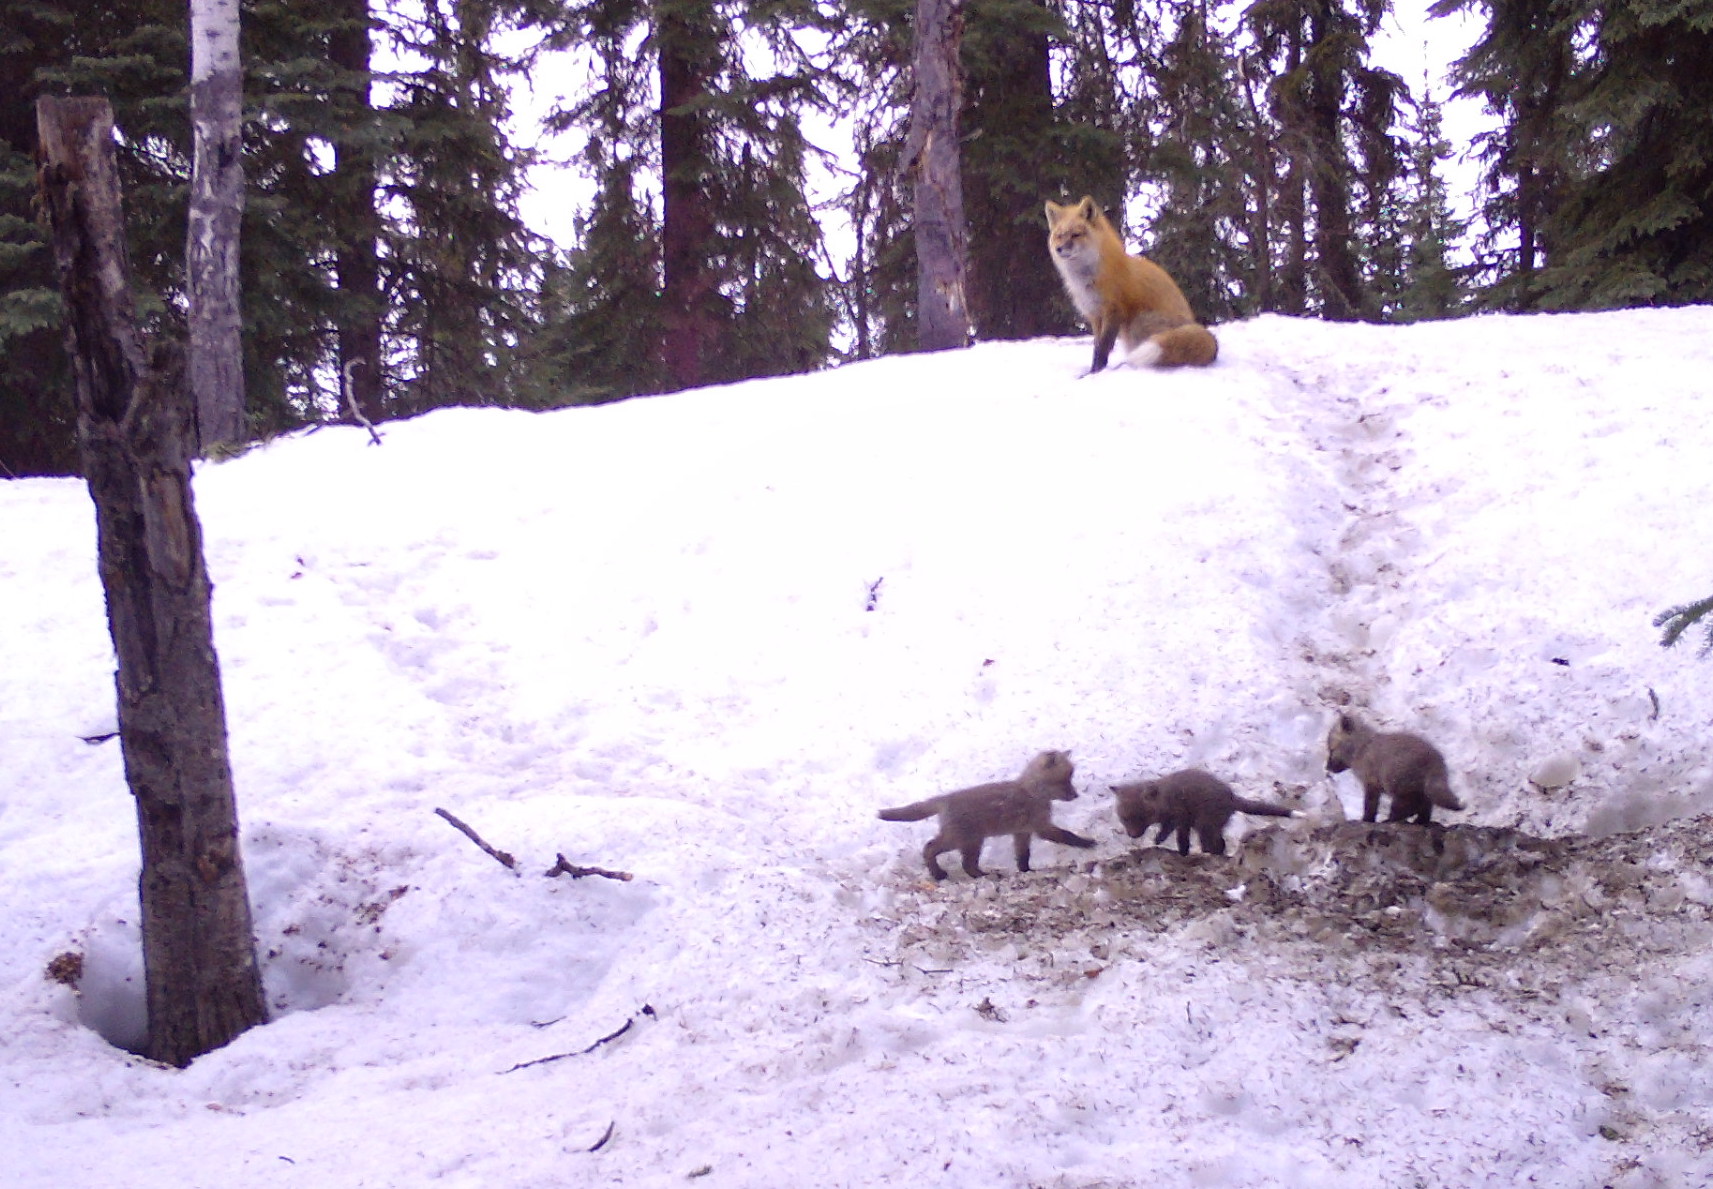 three fox kits play in front of the entrance to their den while an adult red fox sits uphill in a snowy lanscape